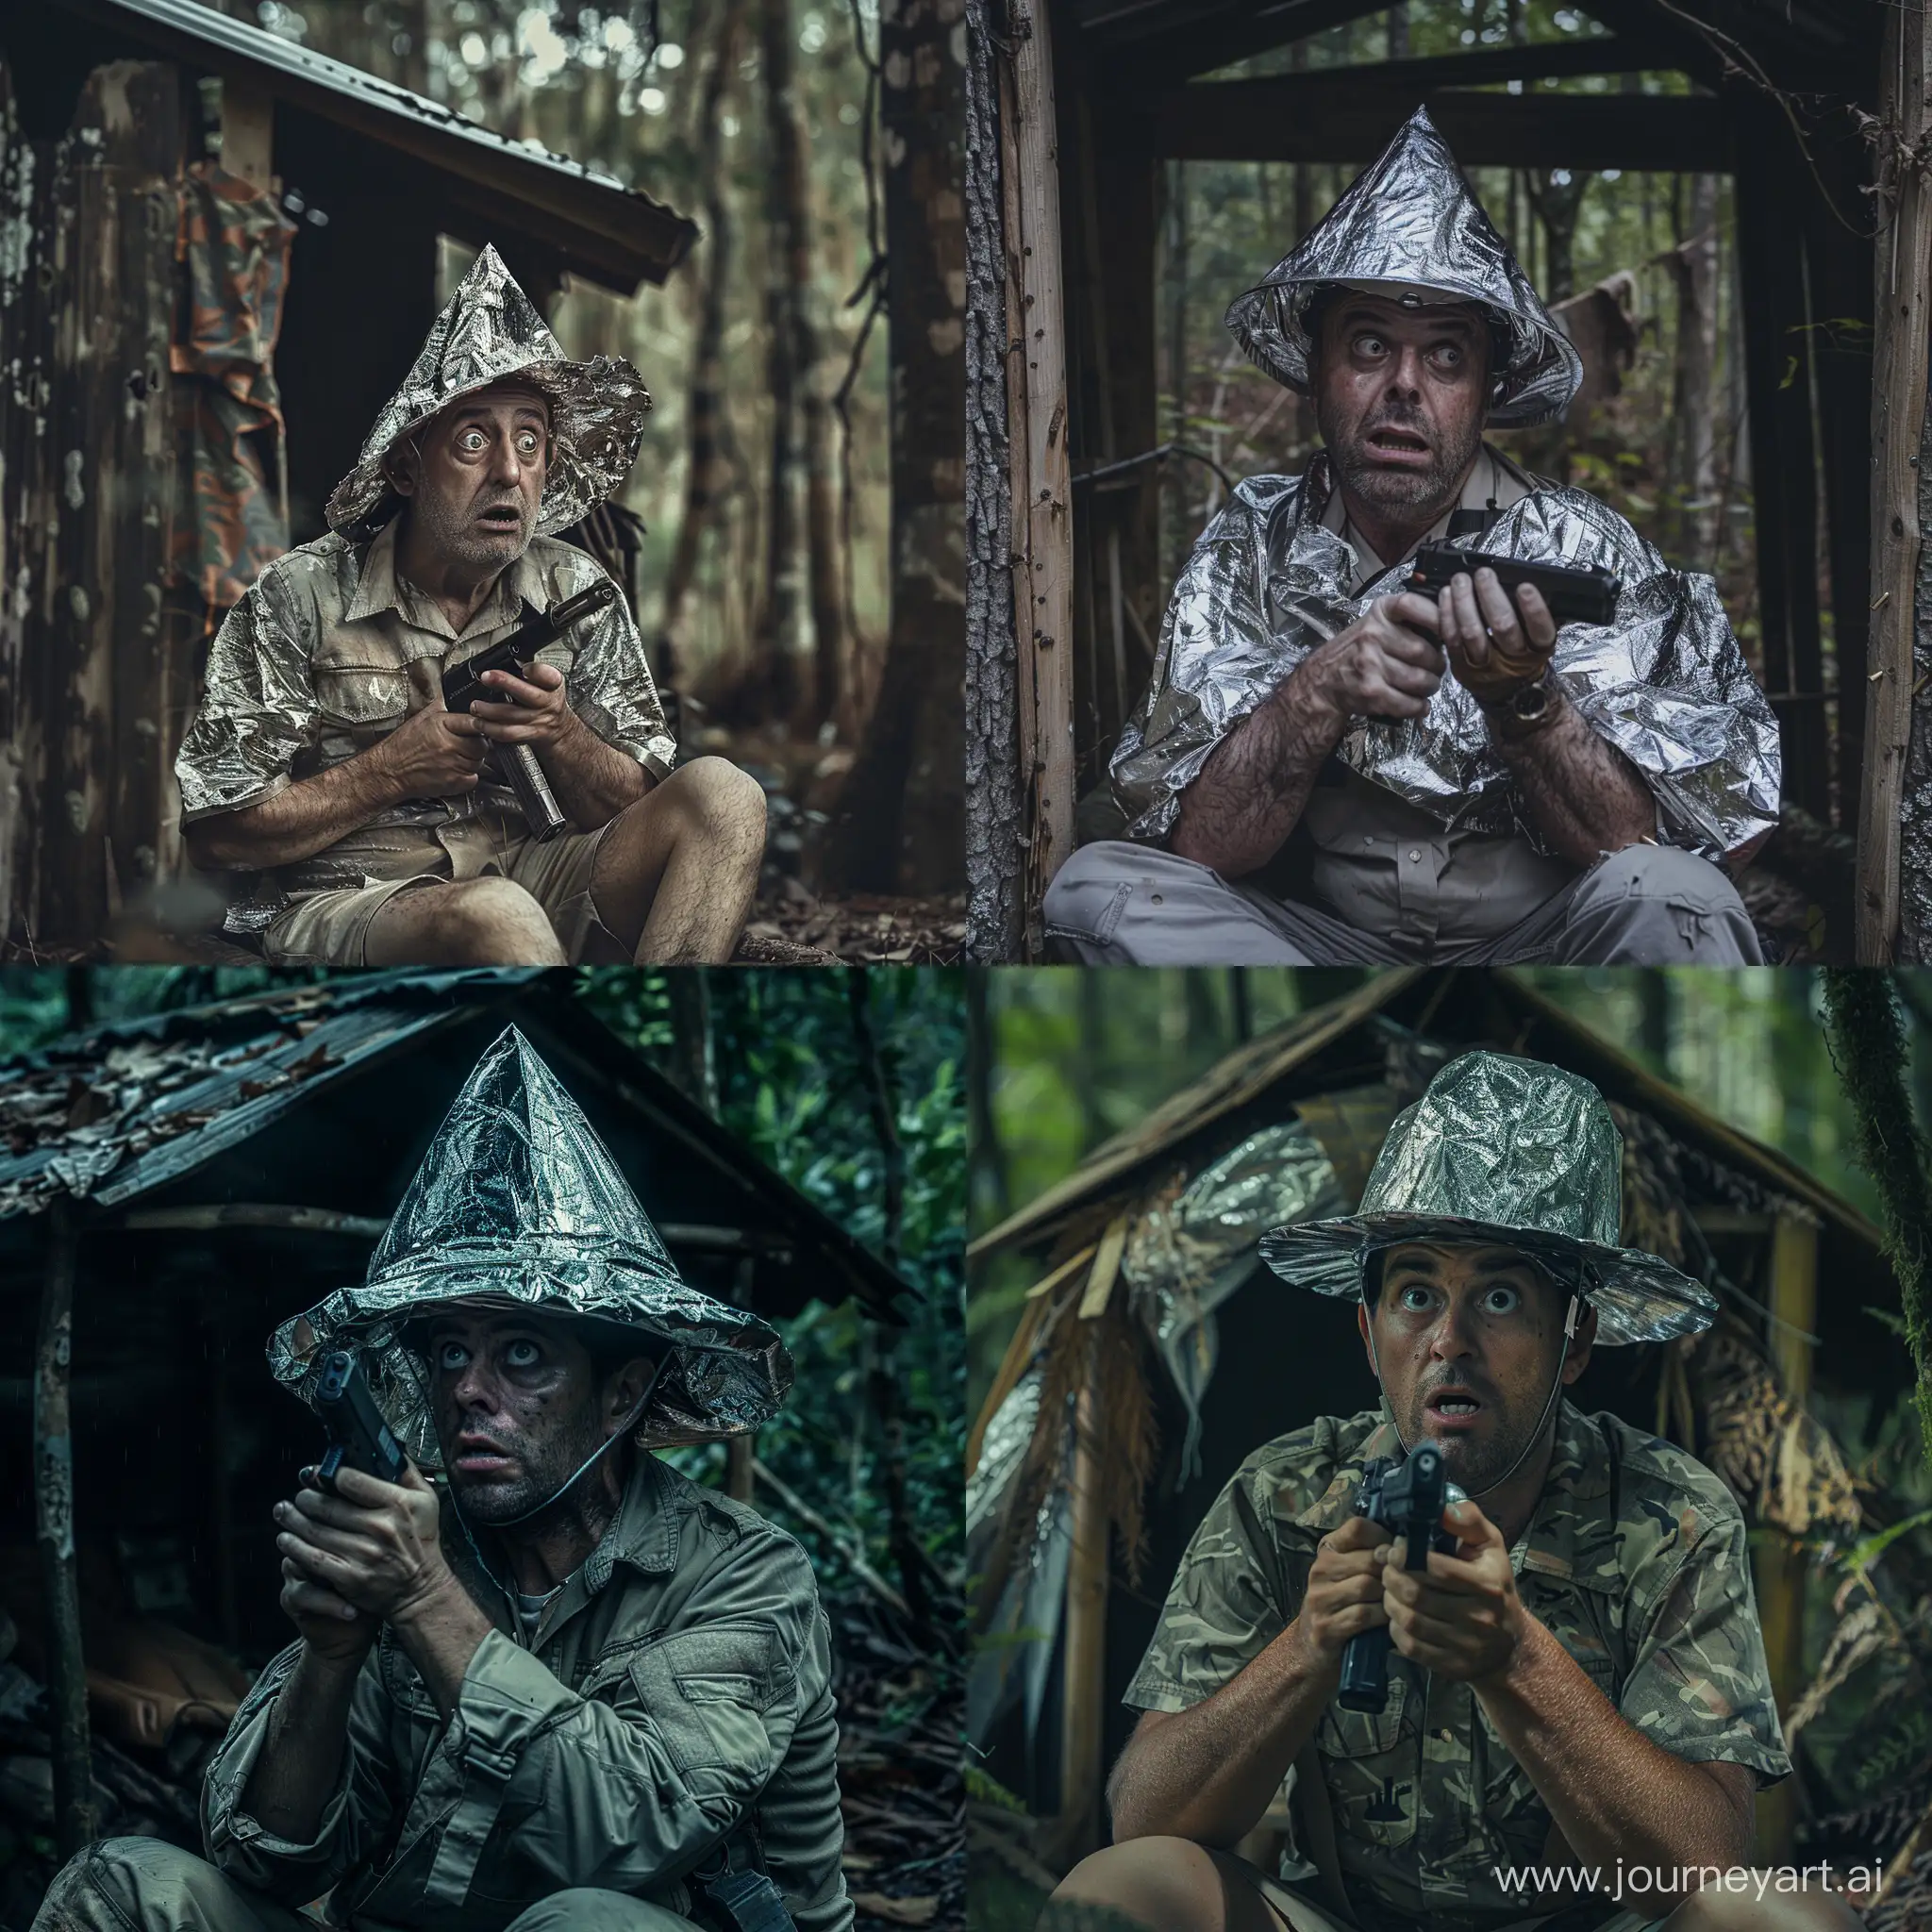 a man wearing a foil hat, with a scared look, sitting with a gun tightly clutching a gun in his hands in a small hut in the forest